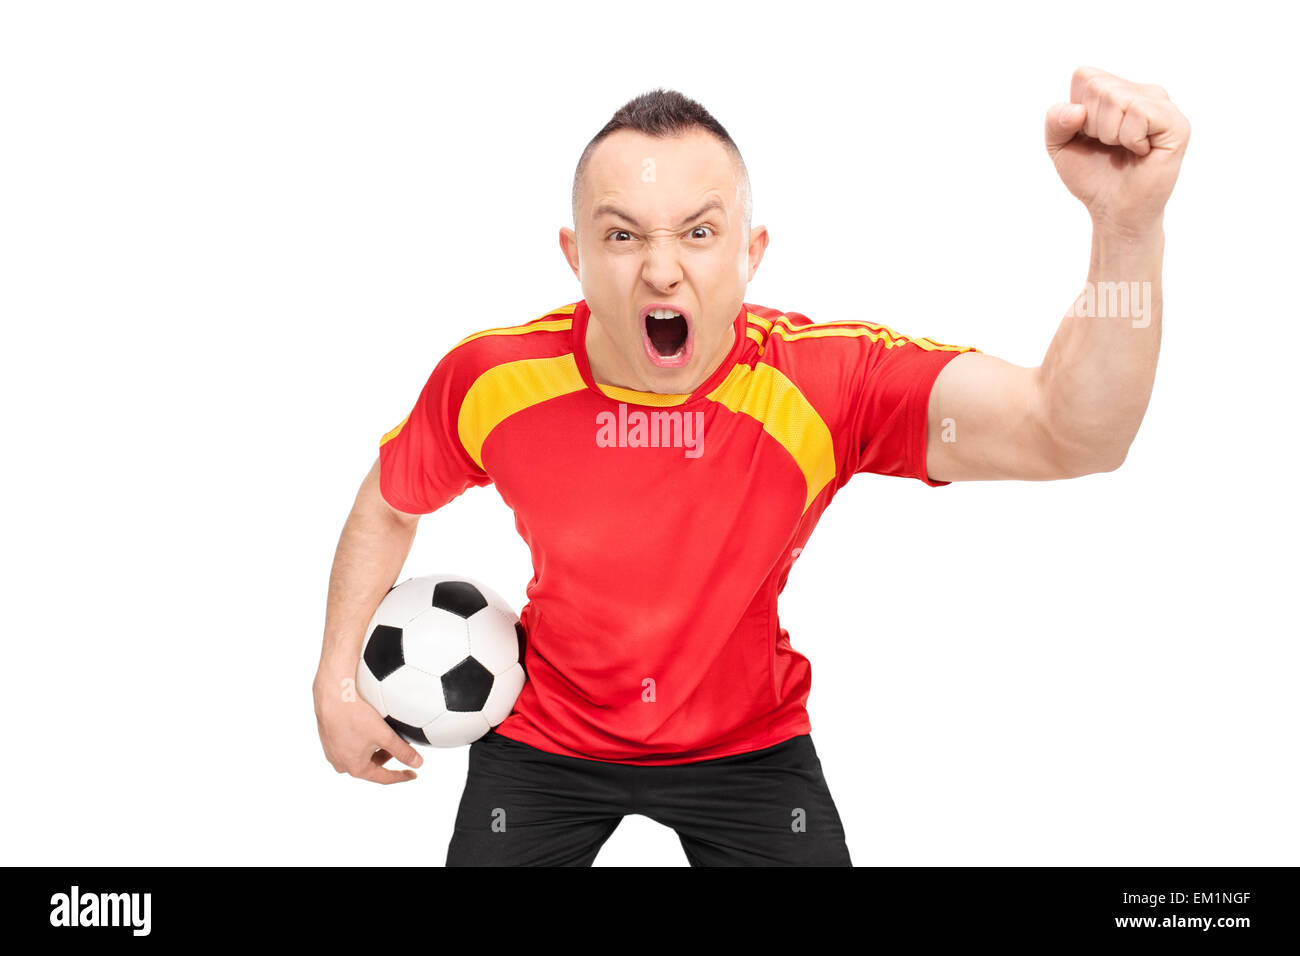 Ecstatic young sports fan in a red football jersey holding a football and cheering isolated on white background Stock Photo